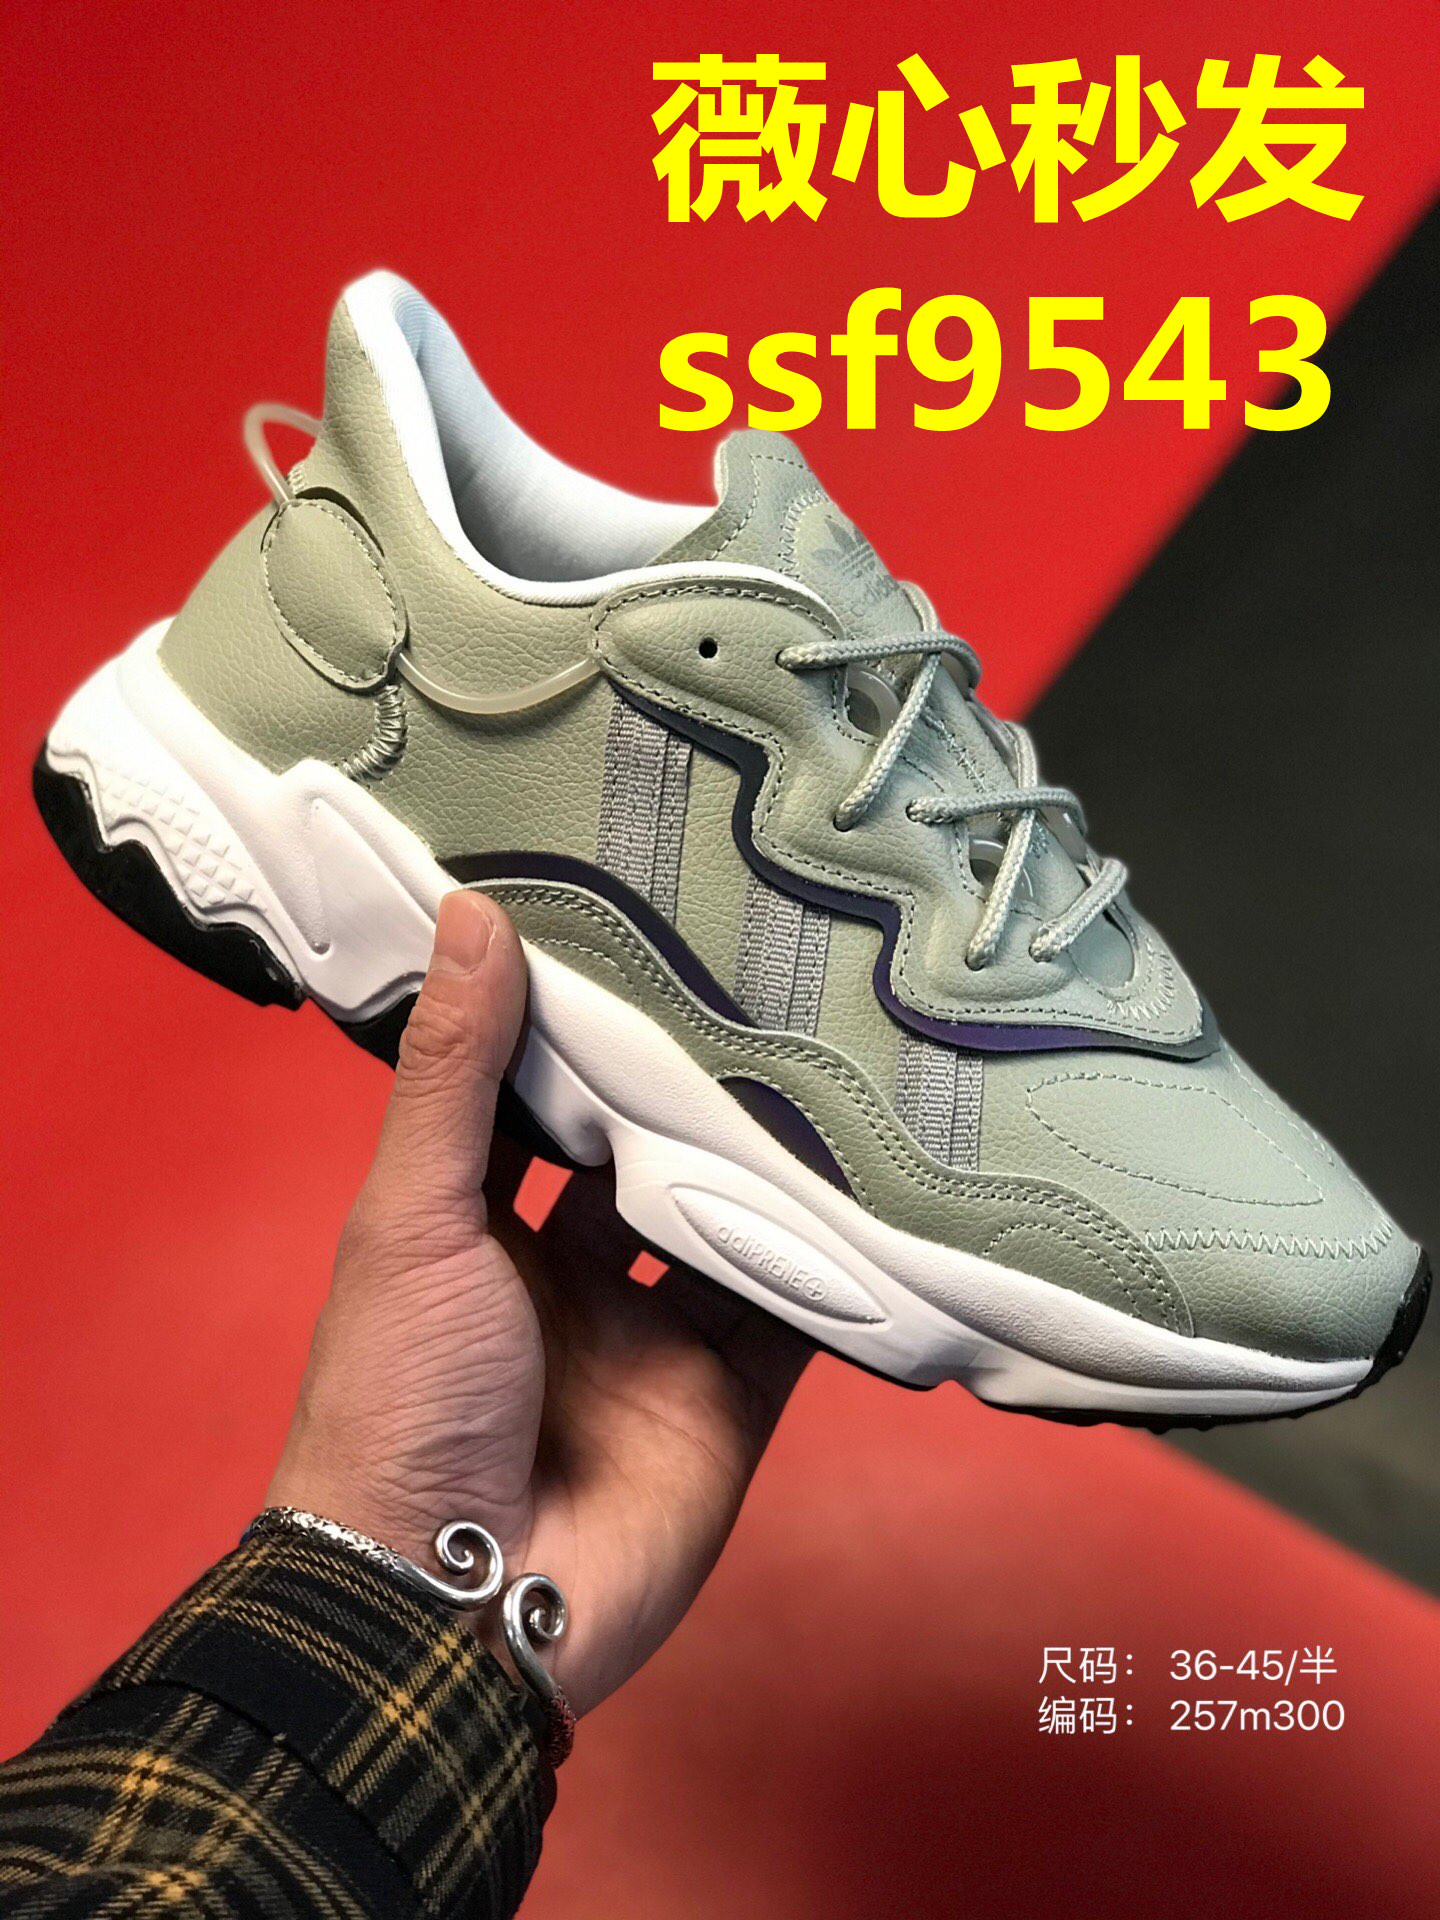 Off White2020 winter new pattern Olive green Men's Shoes Women's Shoes Star of the same style black and white Mesh surface Casual shoes Low Gang non-slip Rain shoes